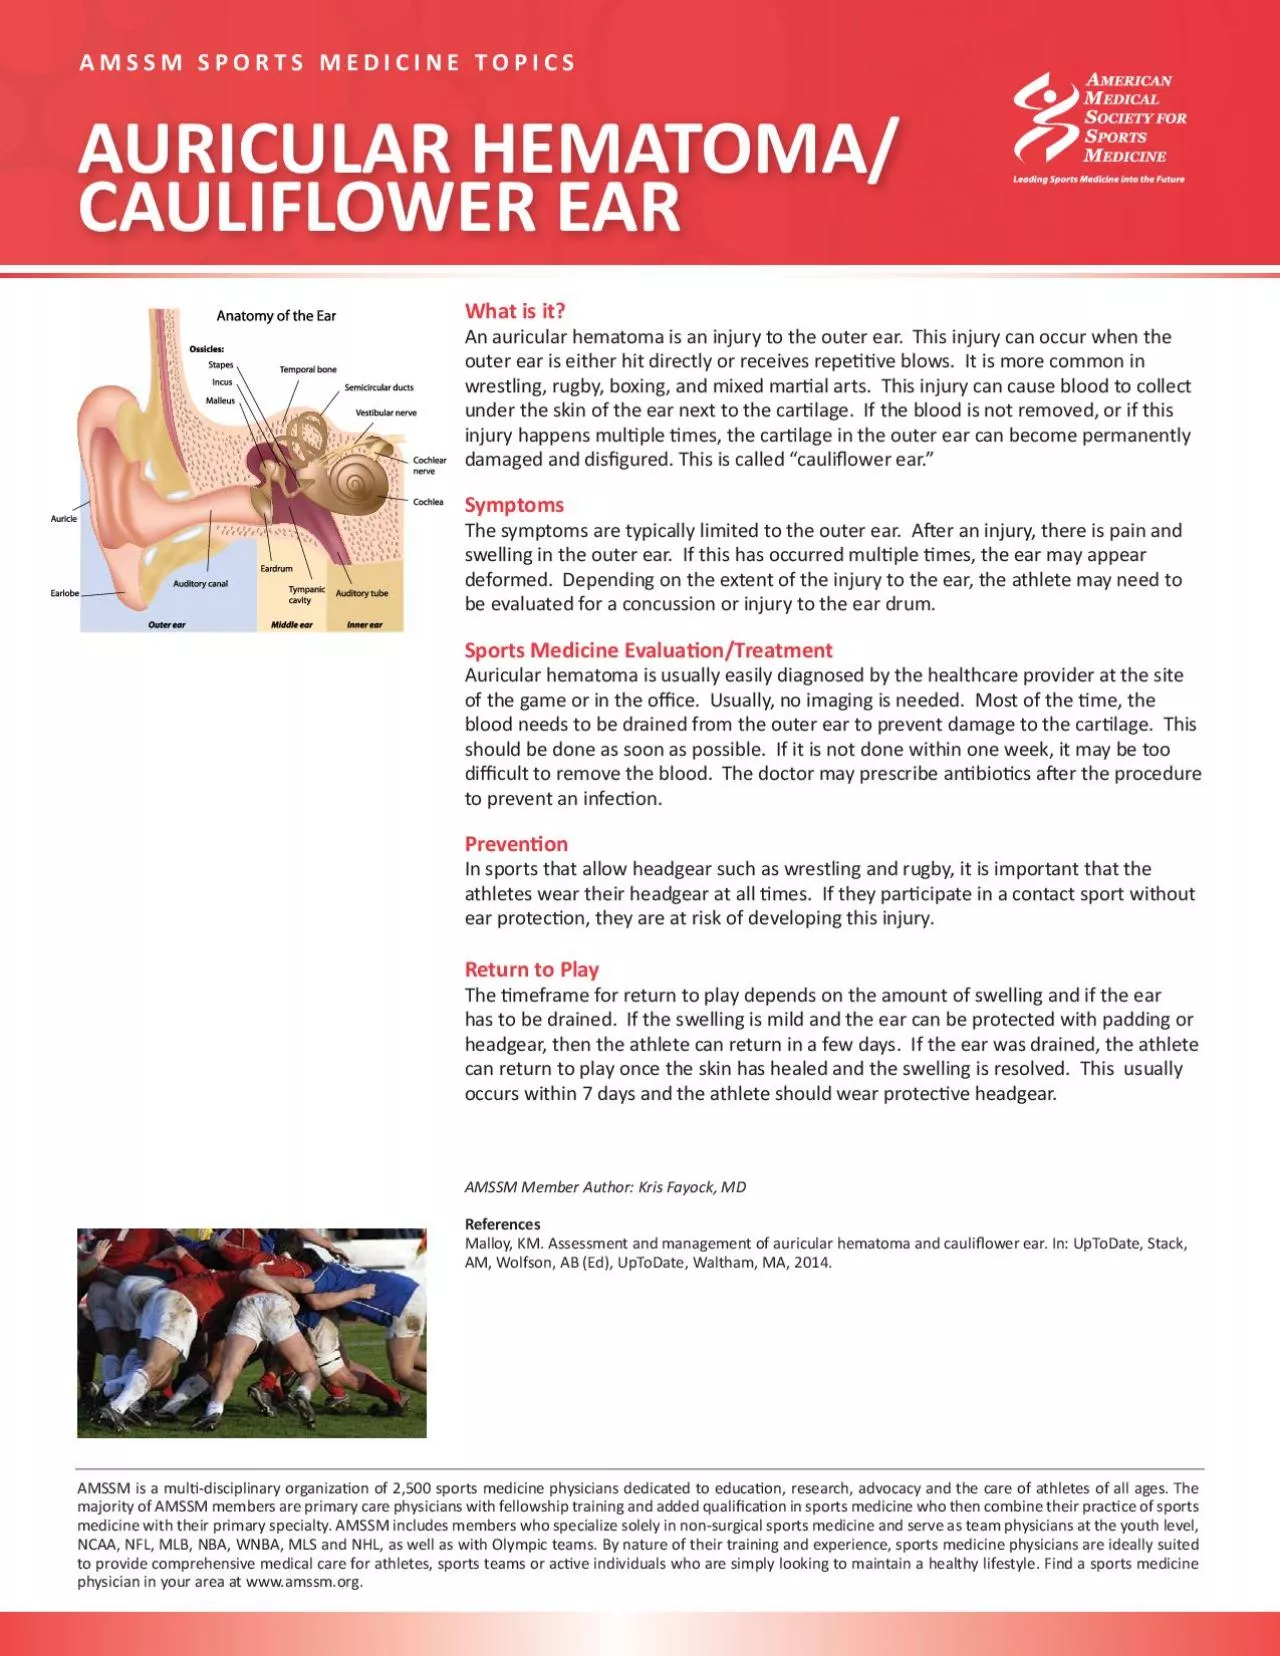 An auricular hematoma is an injury to the outer ear  This injury can